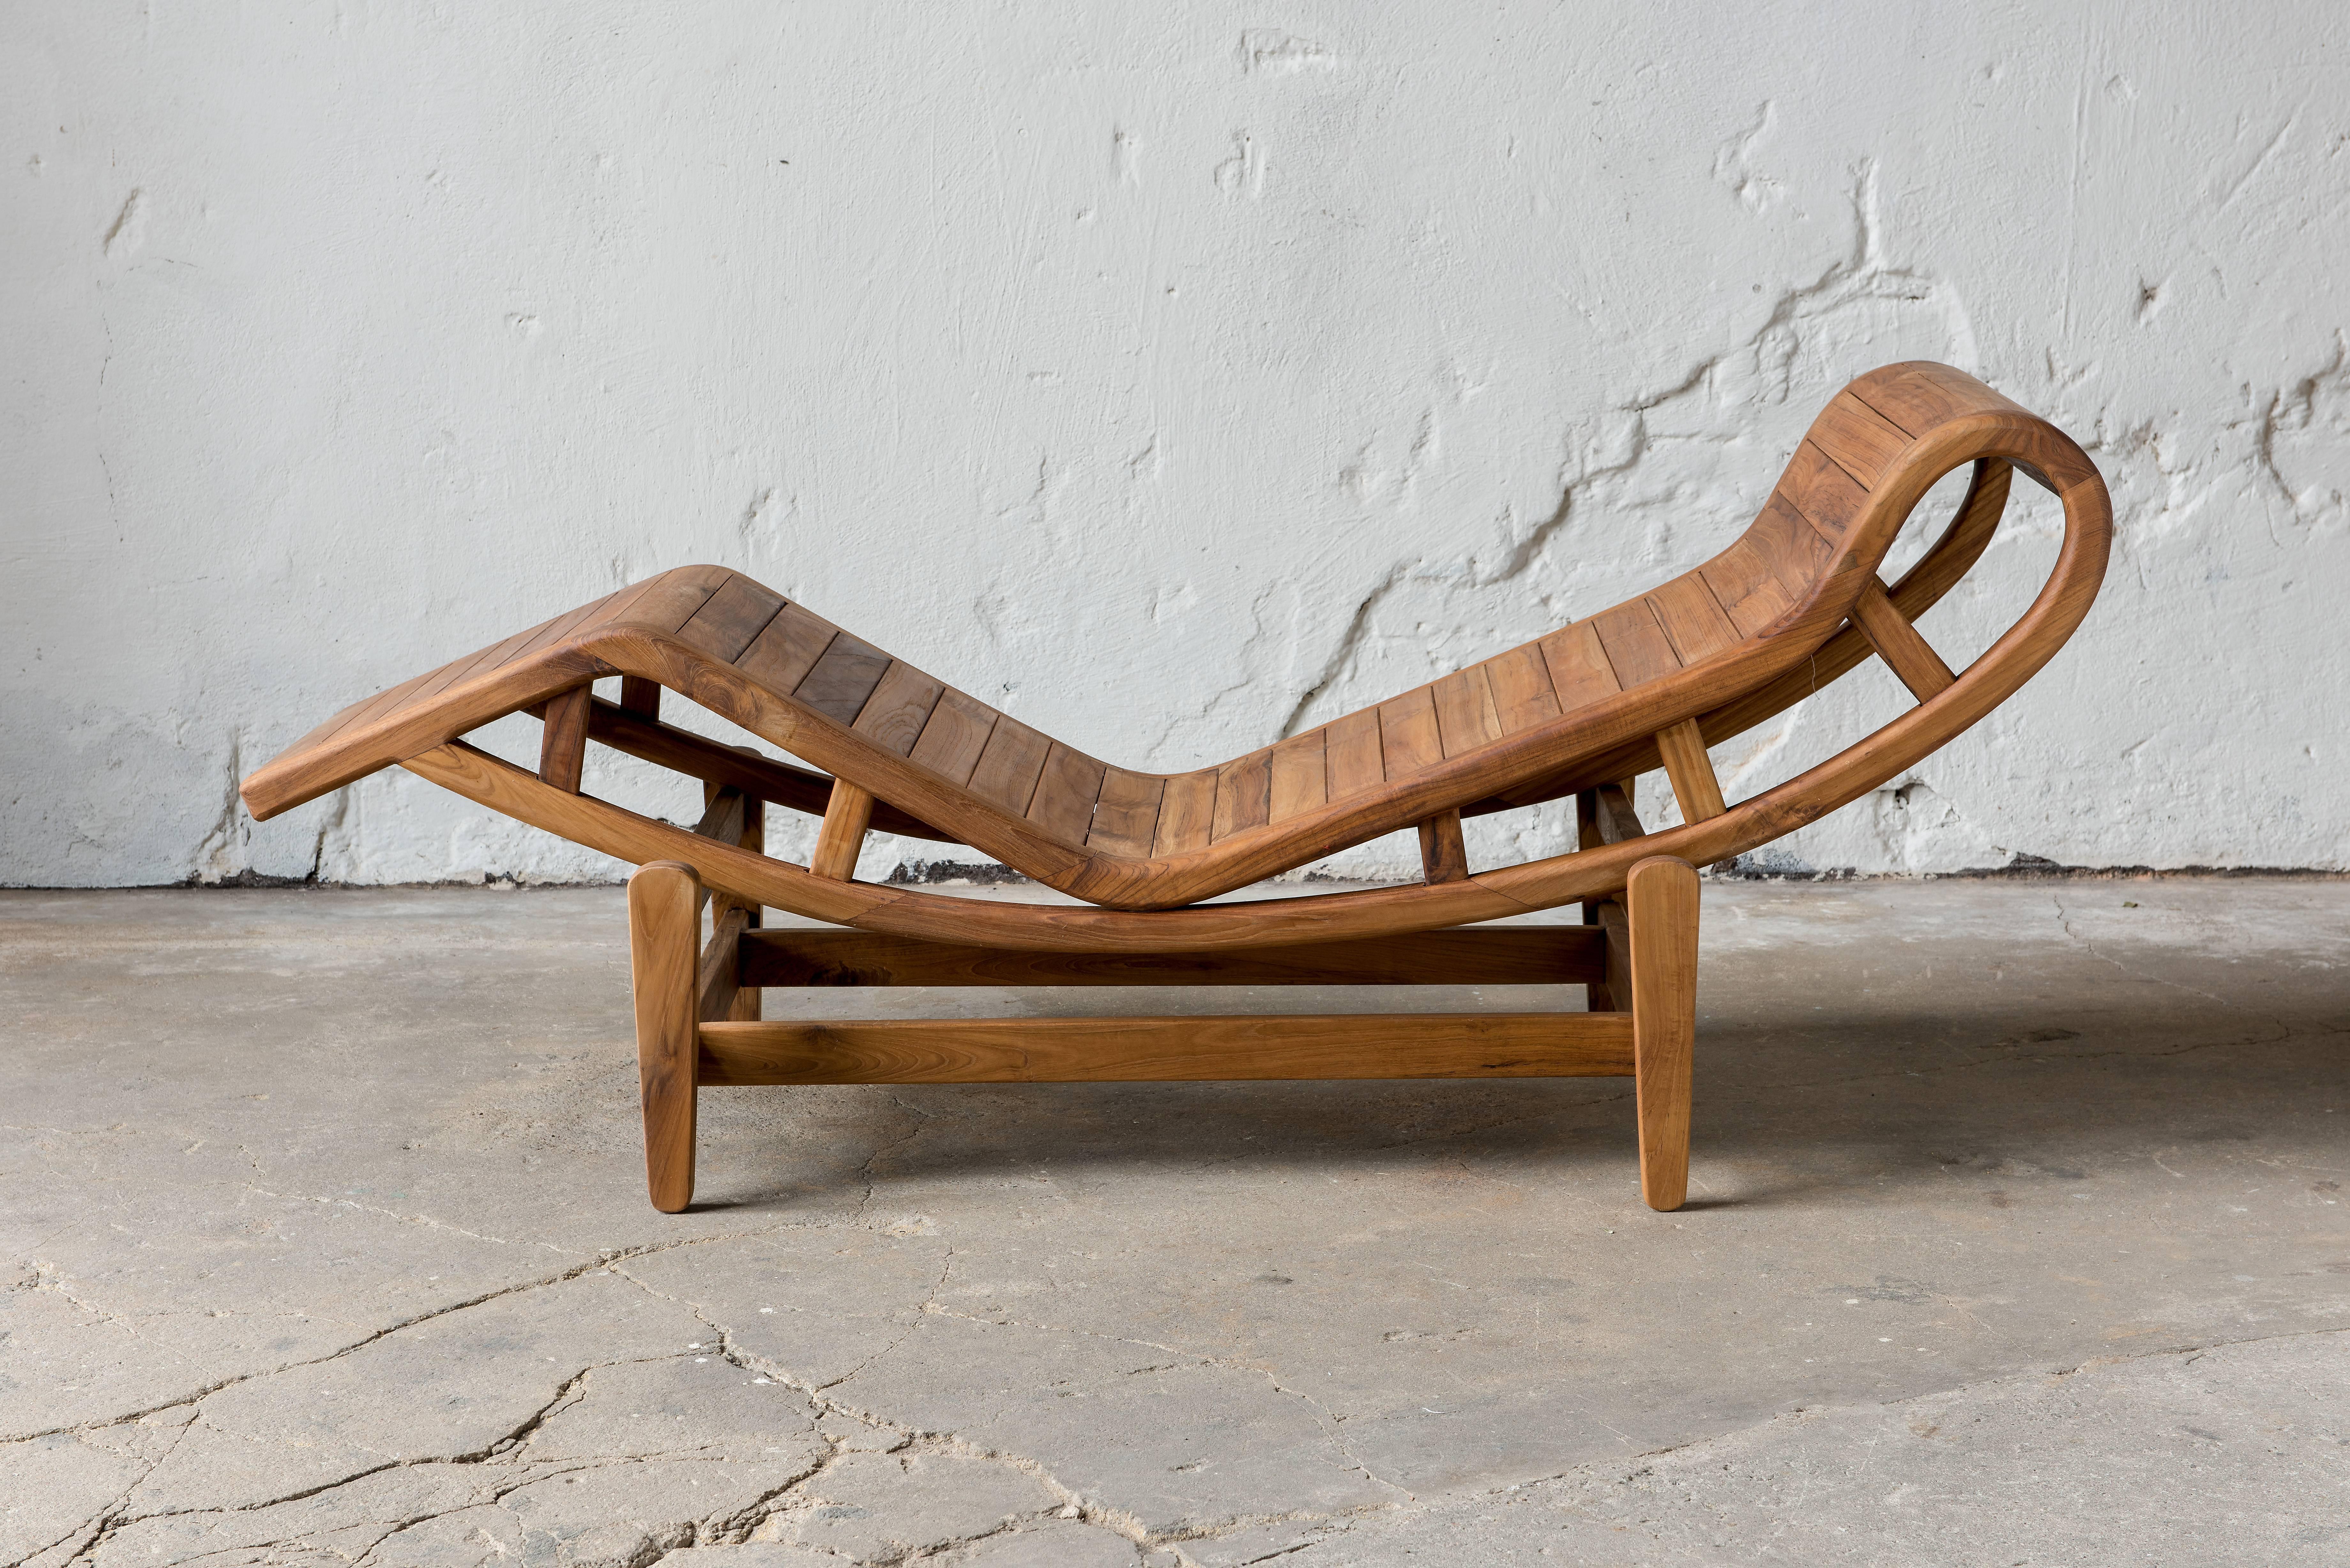 21st century lounger in teak wood, after Le Corbusier, LC4. 
Two parts, bottom and seat.

Produced and branded by R+R Sweden.